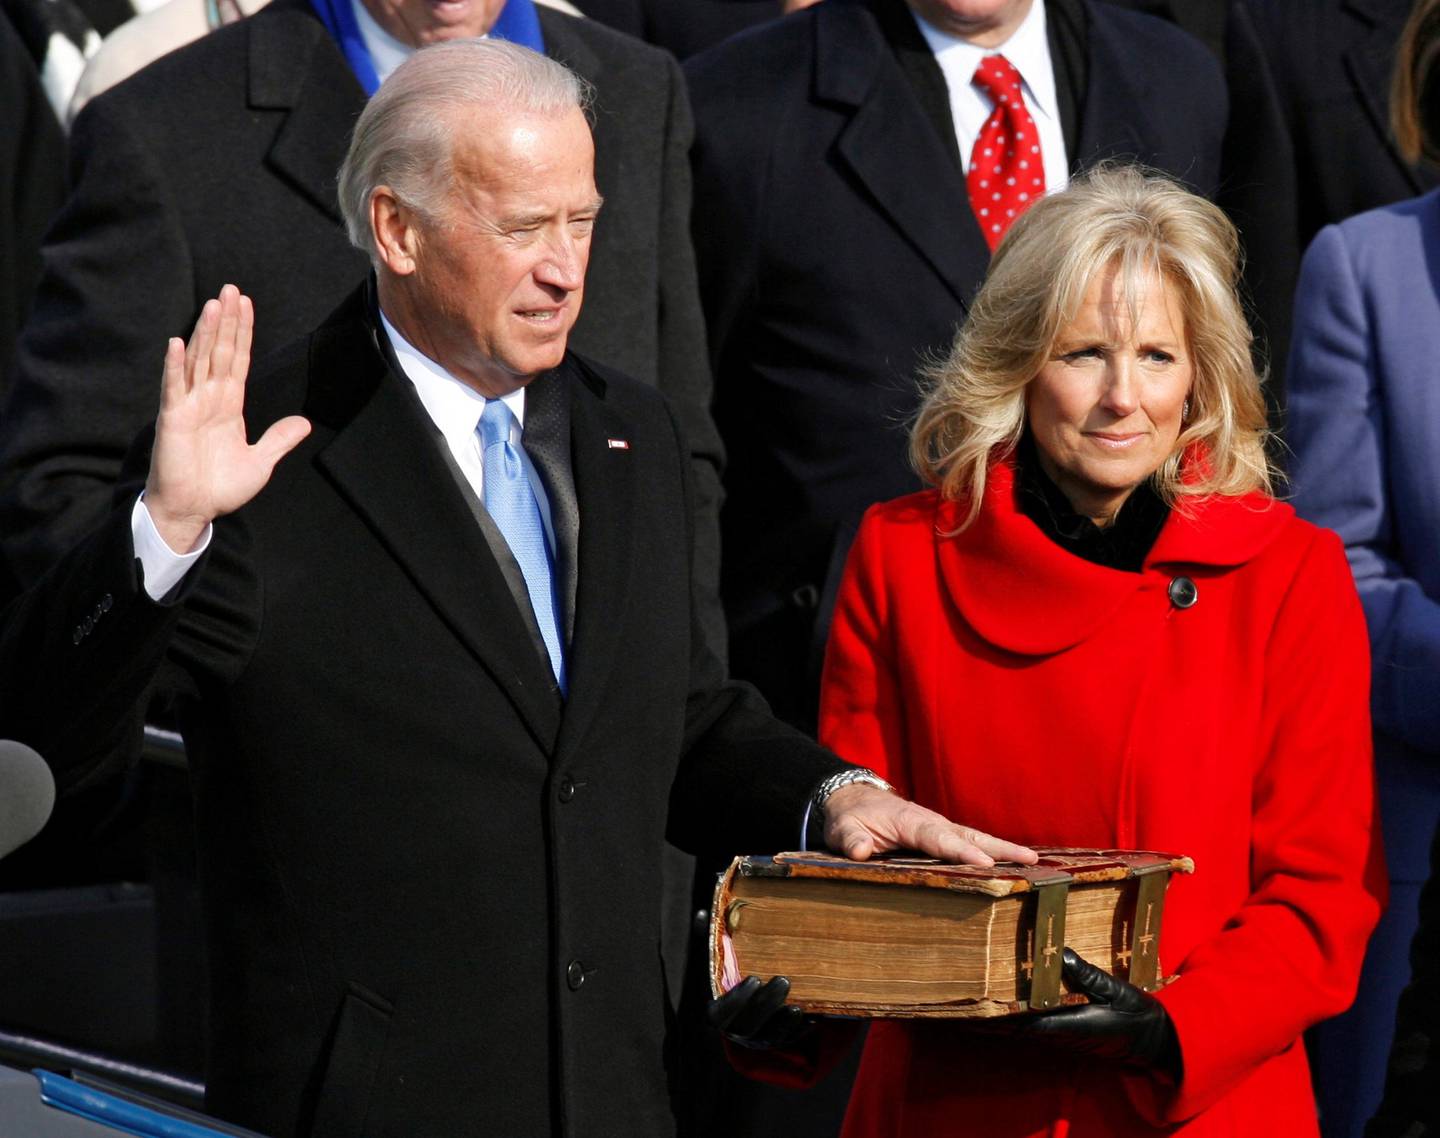 FILE PHOTO: U.S. Vice President Joe Biden is sworn in as his wife Jill watches during the inauguration ceremony for President Barack Obama in Washington January 20, 2009.     REUTERS/Jim Bourg/File Photo